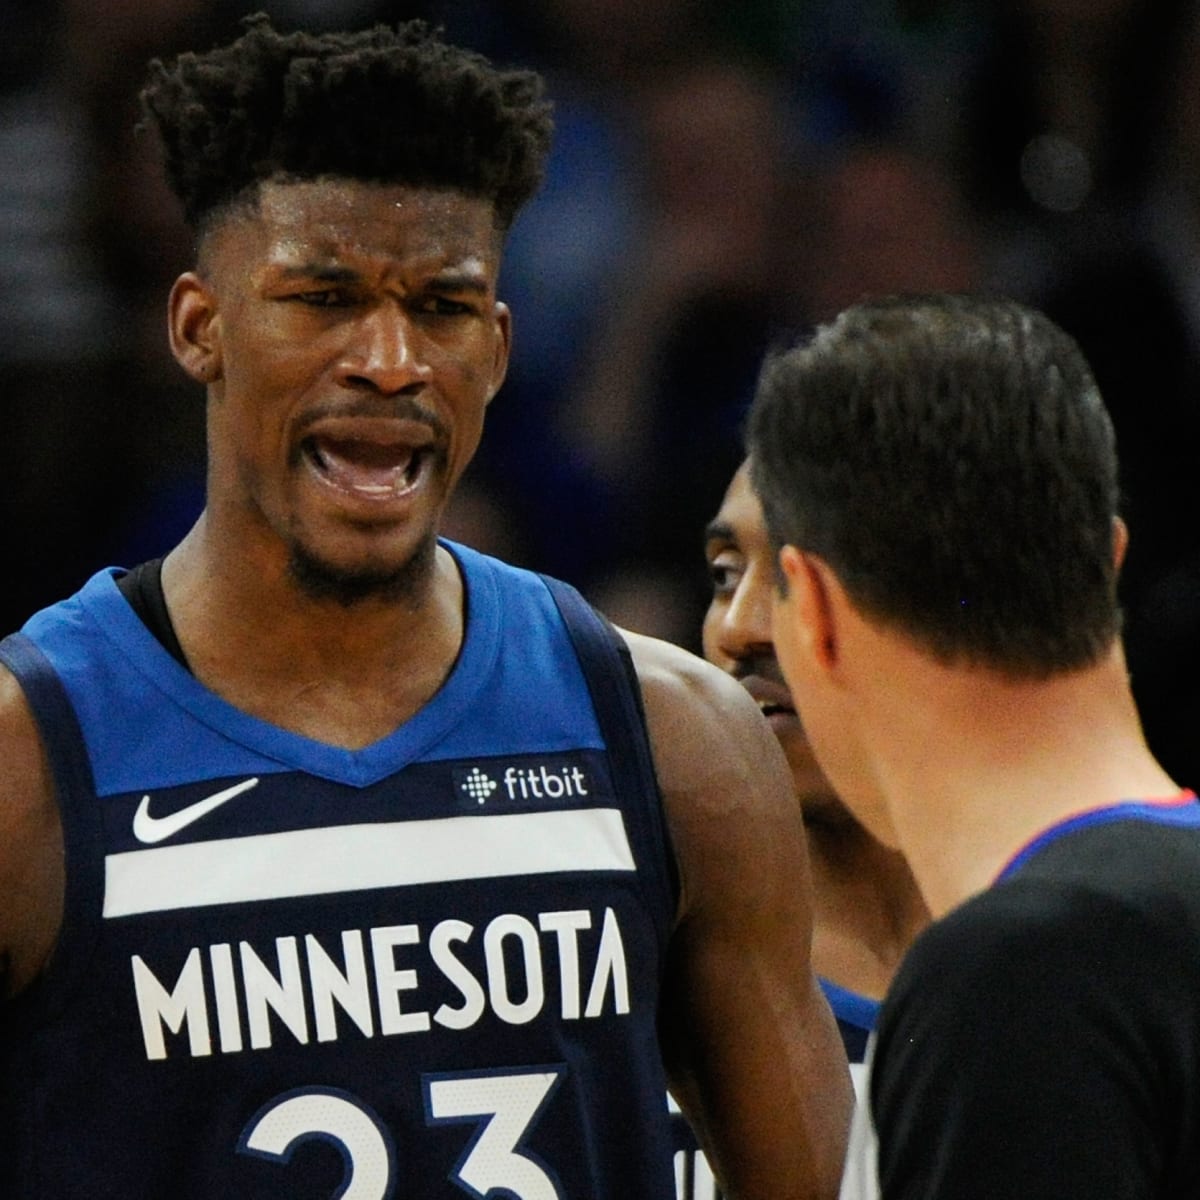 Emotional Jimmy Butler reportedly challenges Wolves teammates at